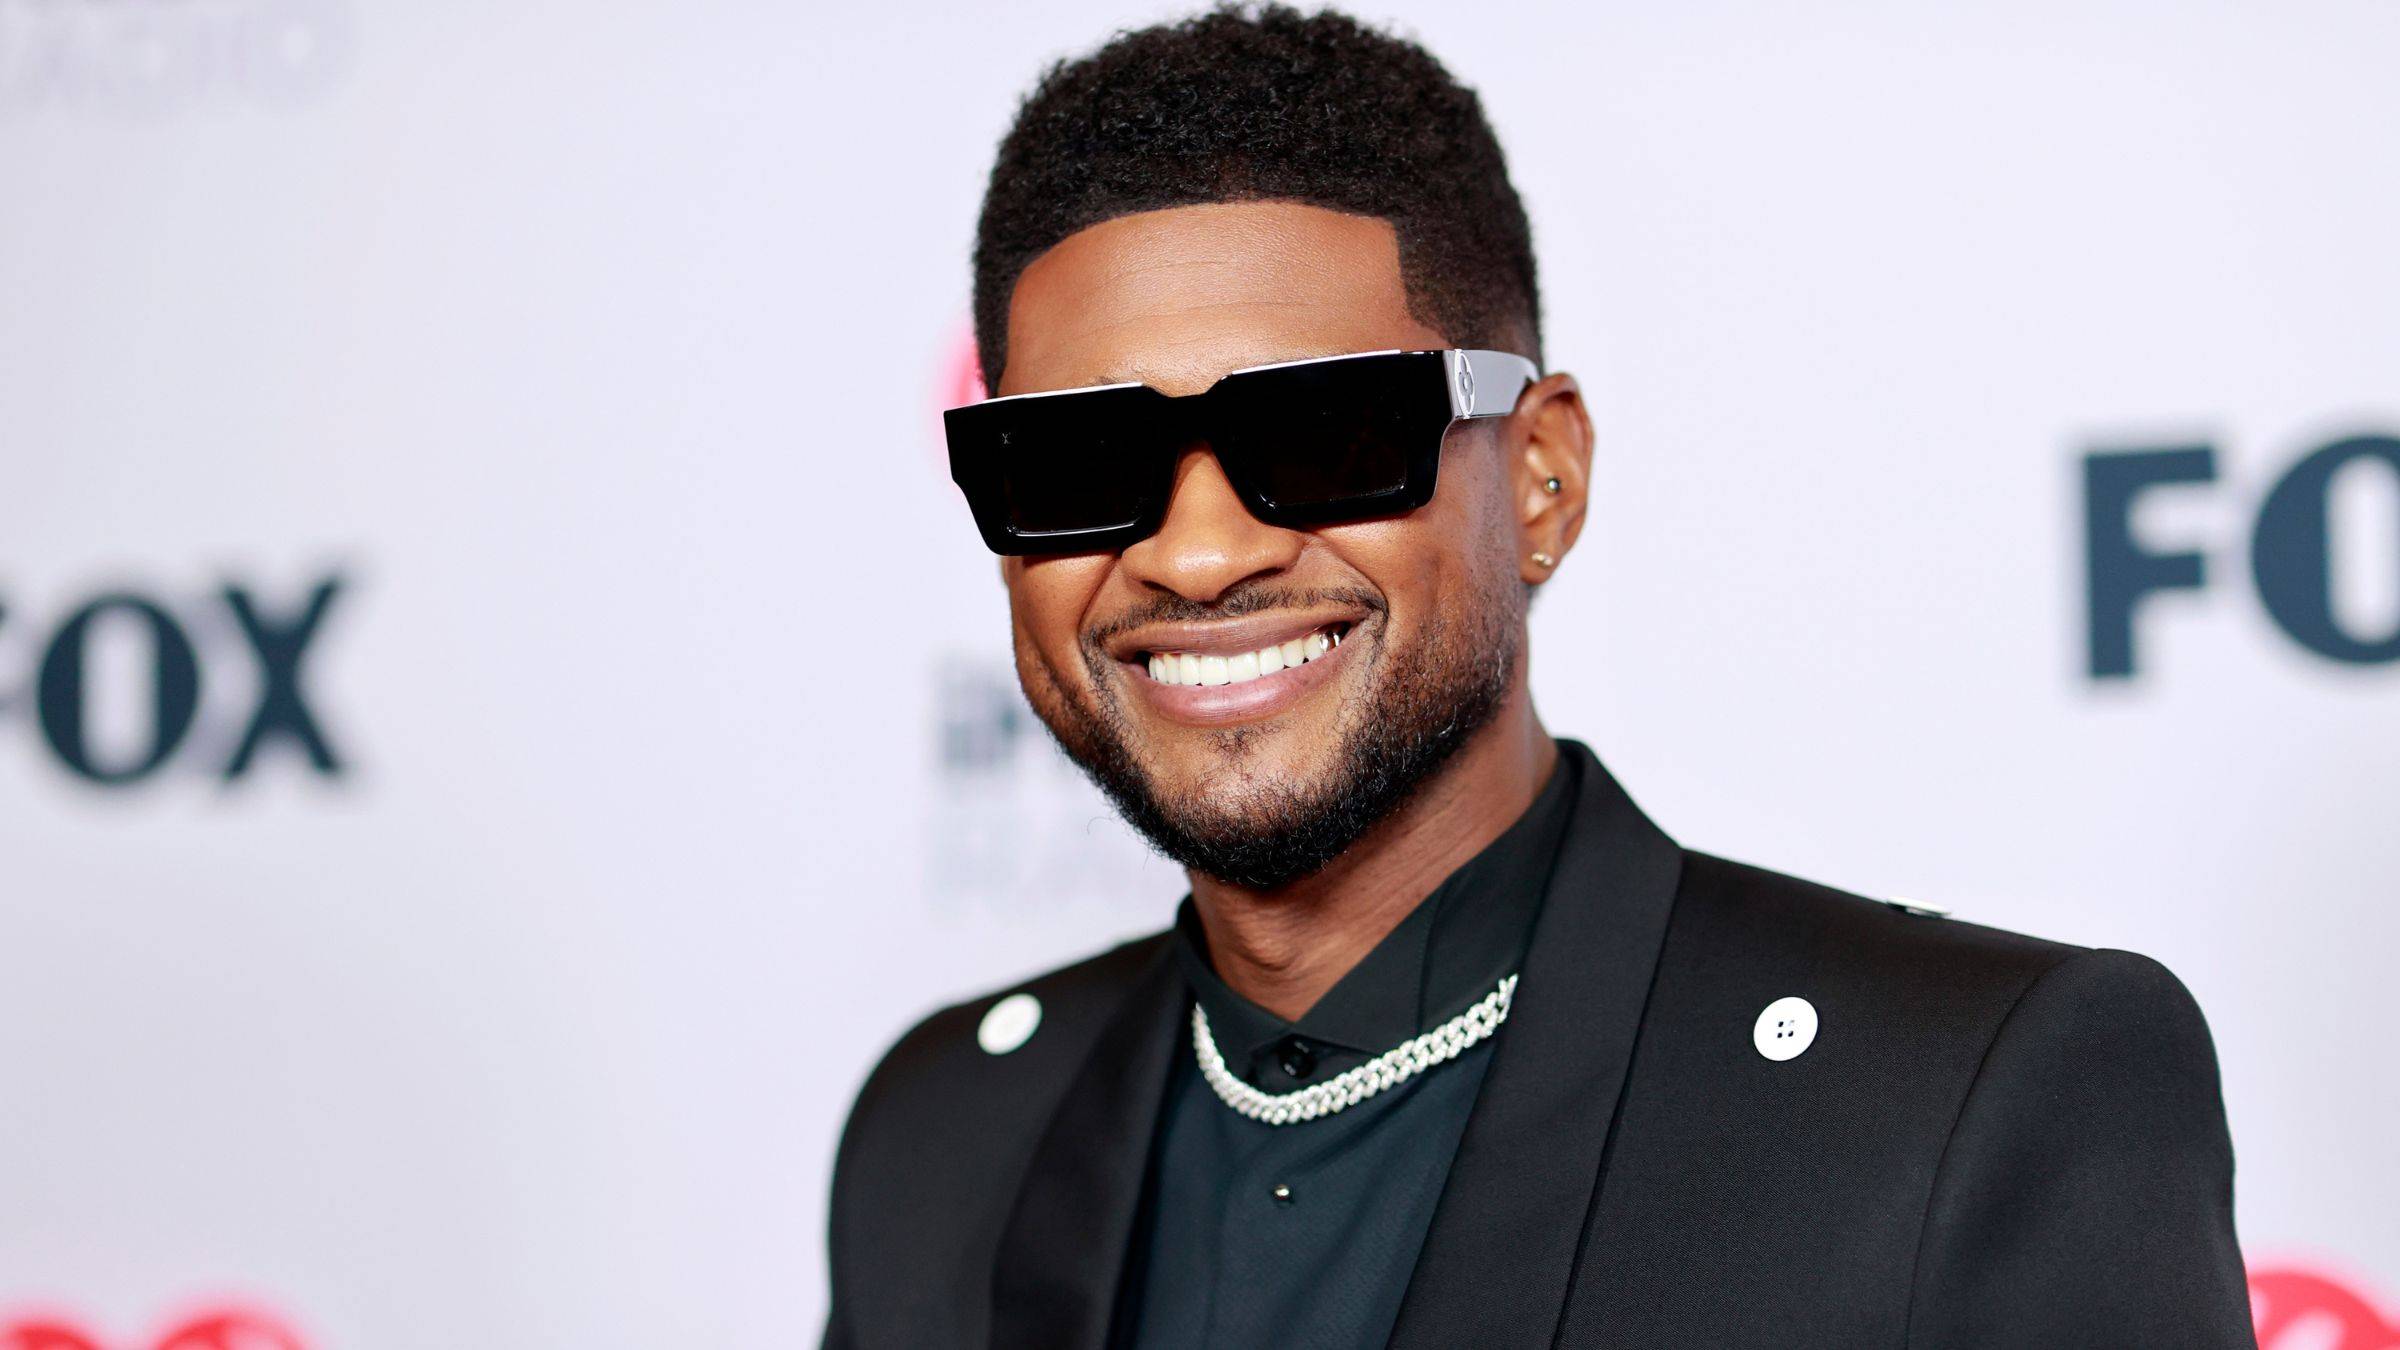 Usher Goes Shirtless In New SKIMS Campaign, News